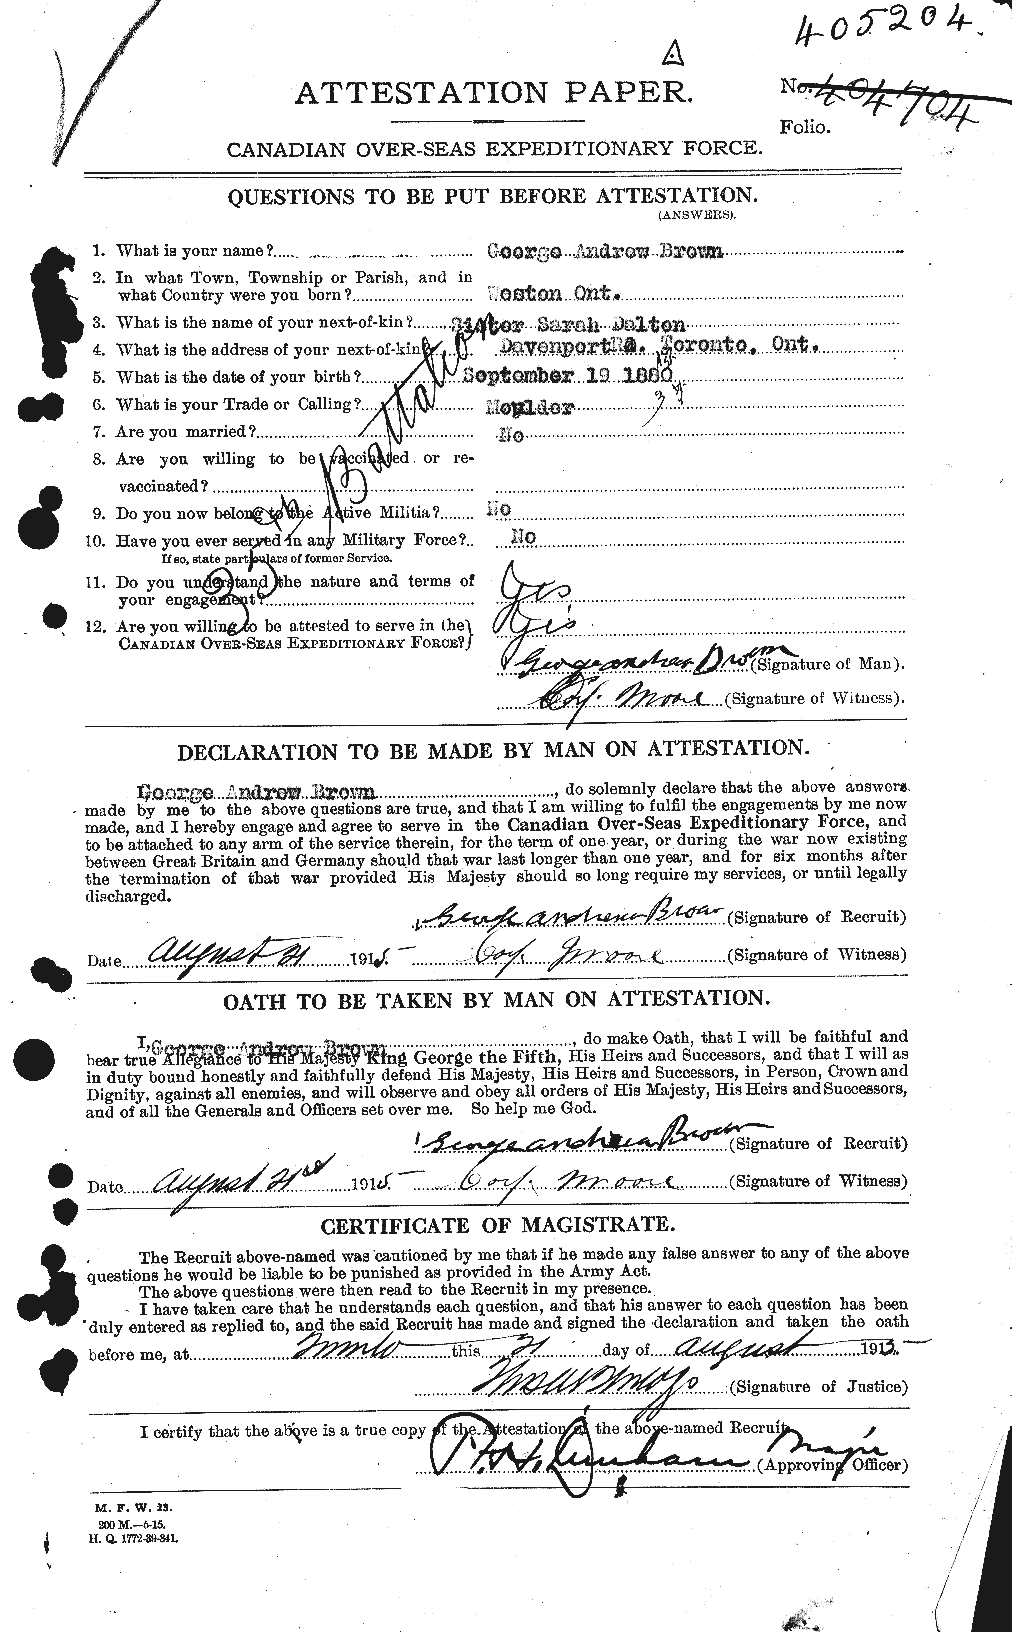 Personnel Records of the First World War - CEF 267883a